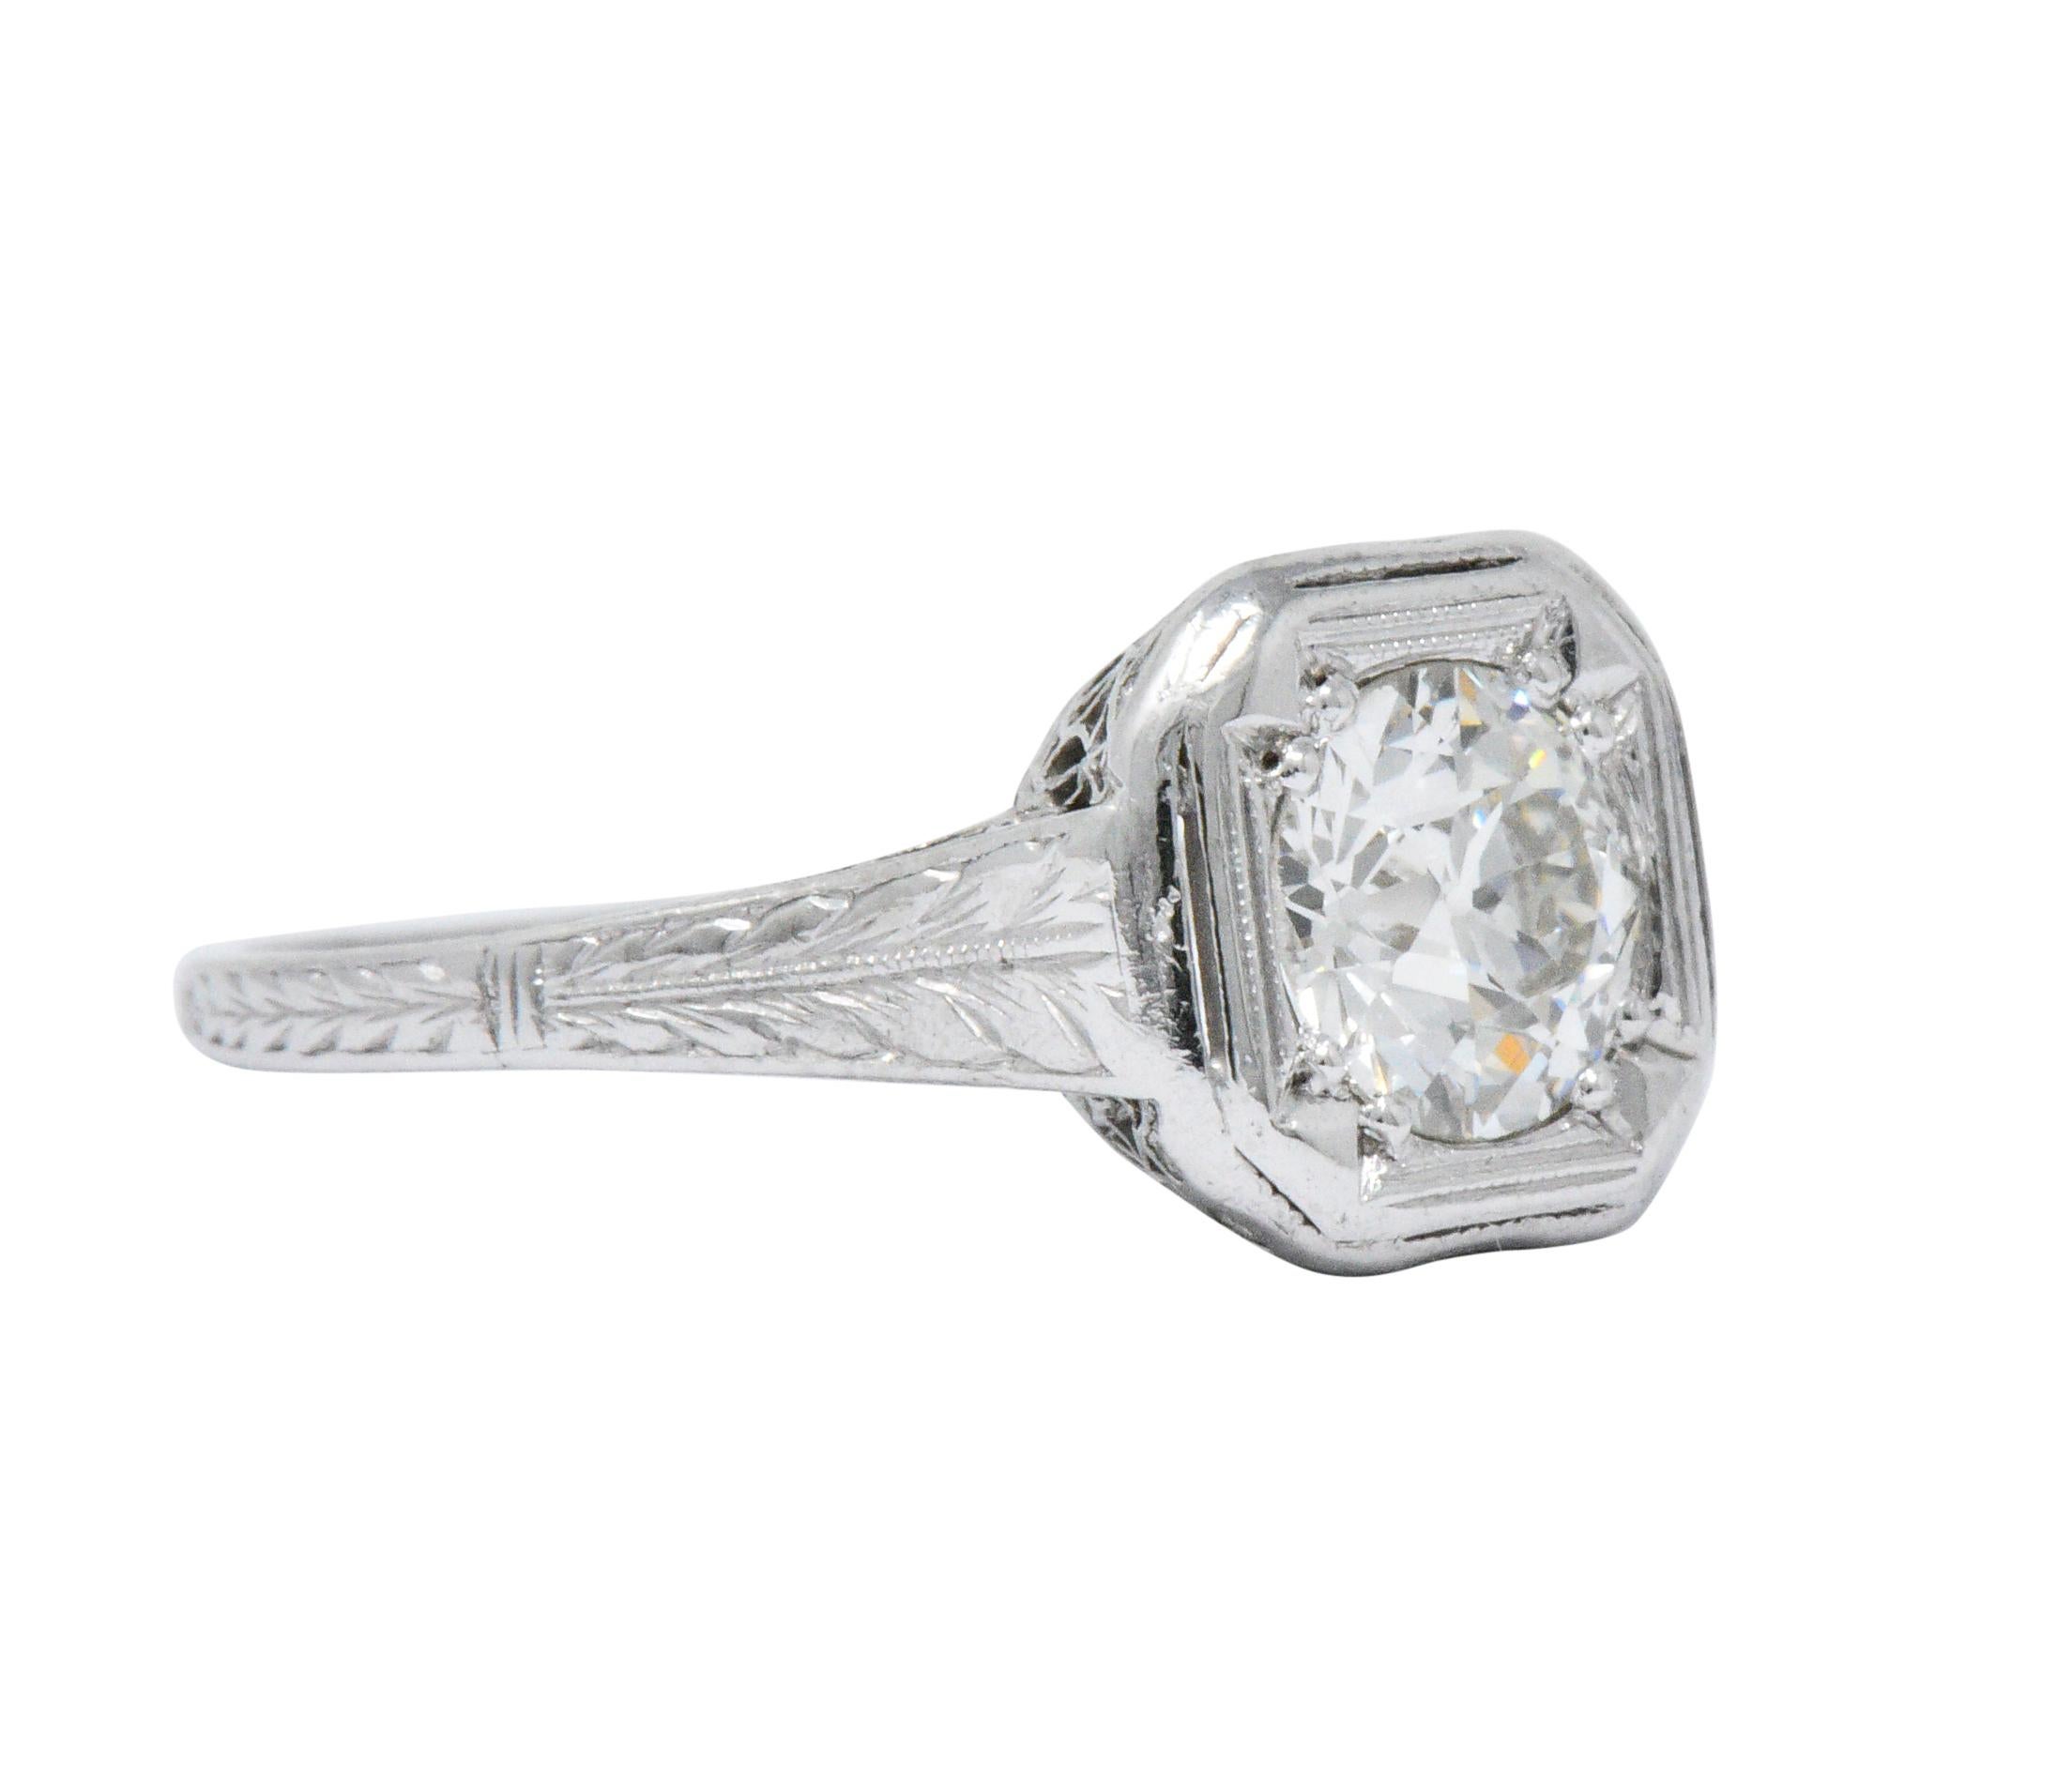 Centering an old European cut diamond weighing approximately 0.87 carat, I color with VS2 clarity

Set low in cushion shaped mounting featuring a Maltese cross motif setting

With cathedral style shoulders, deeply engraved with wheat foliate motif,